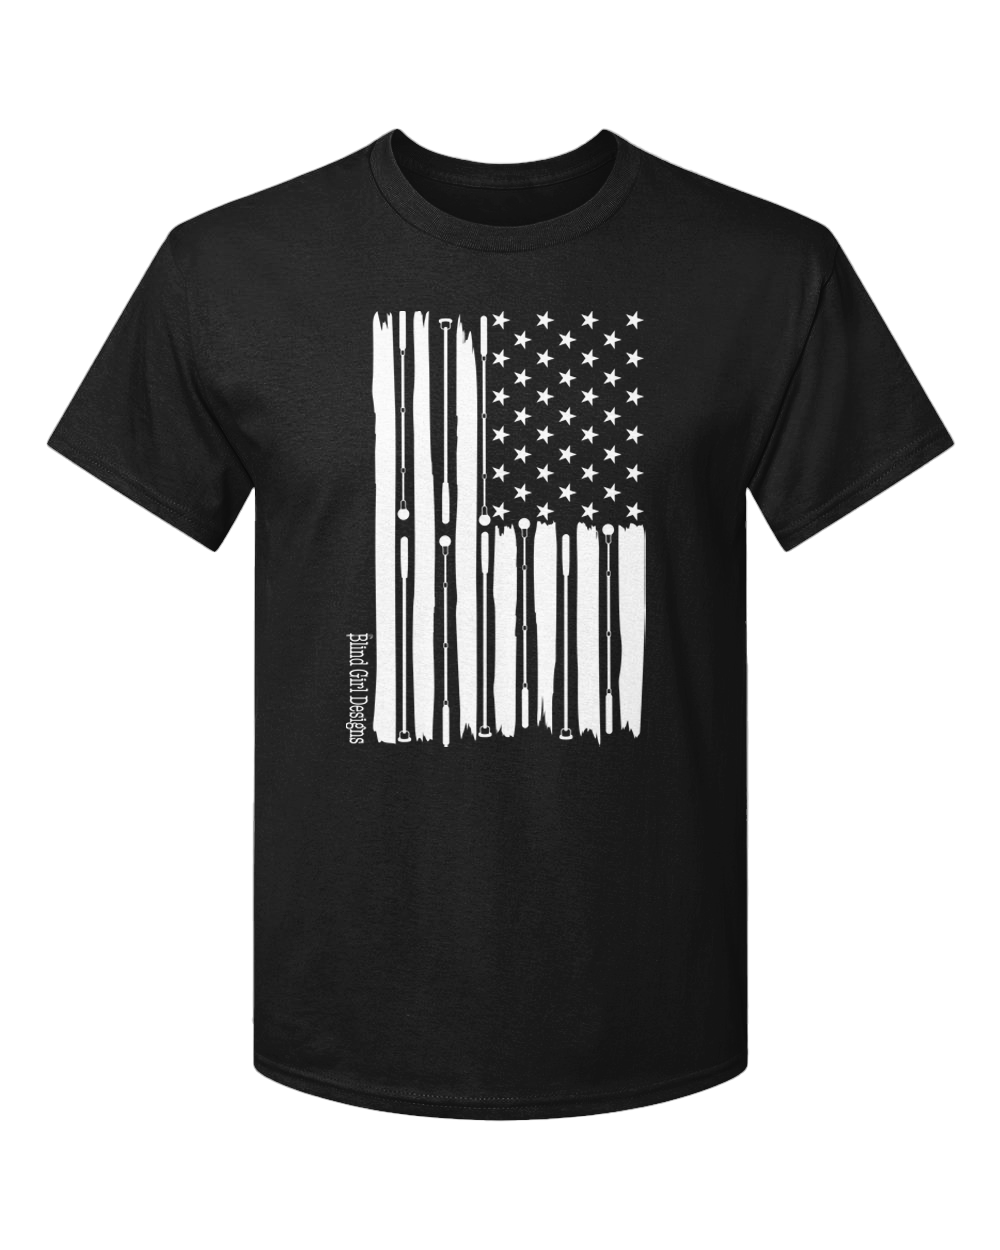 New! 3D American Flag T-Shirt Black with white ink-Bestseller!